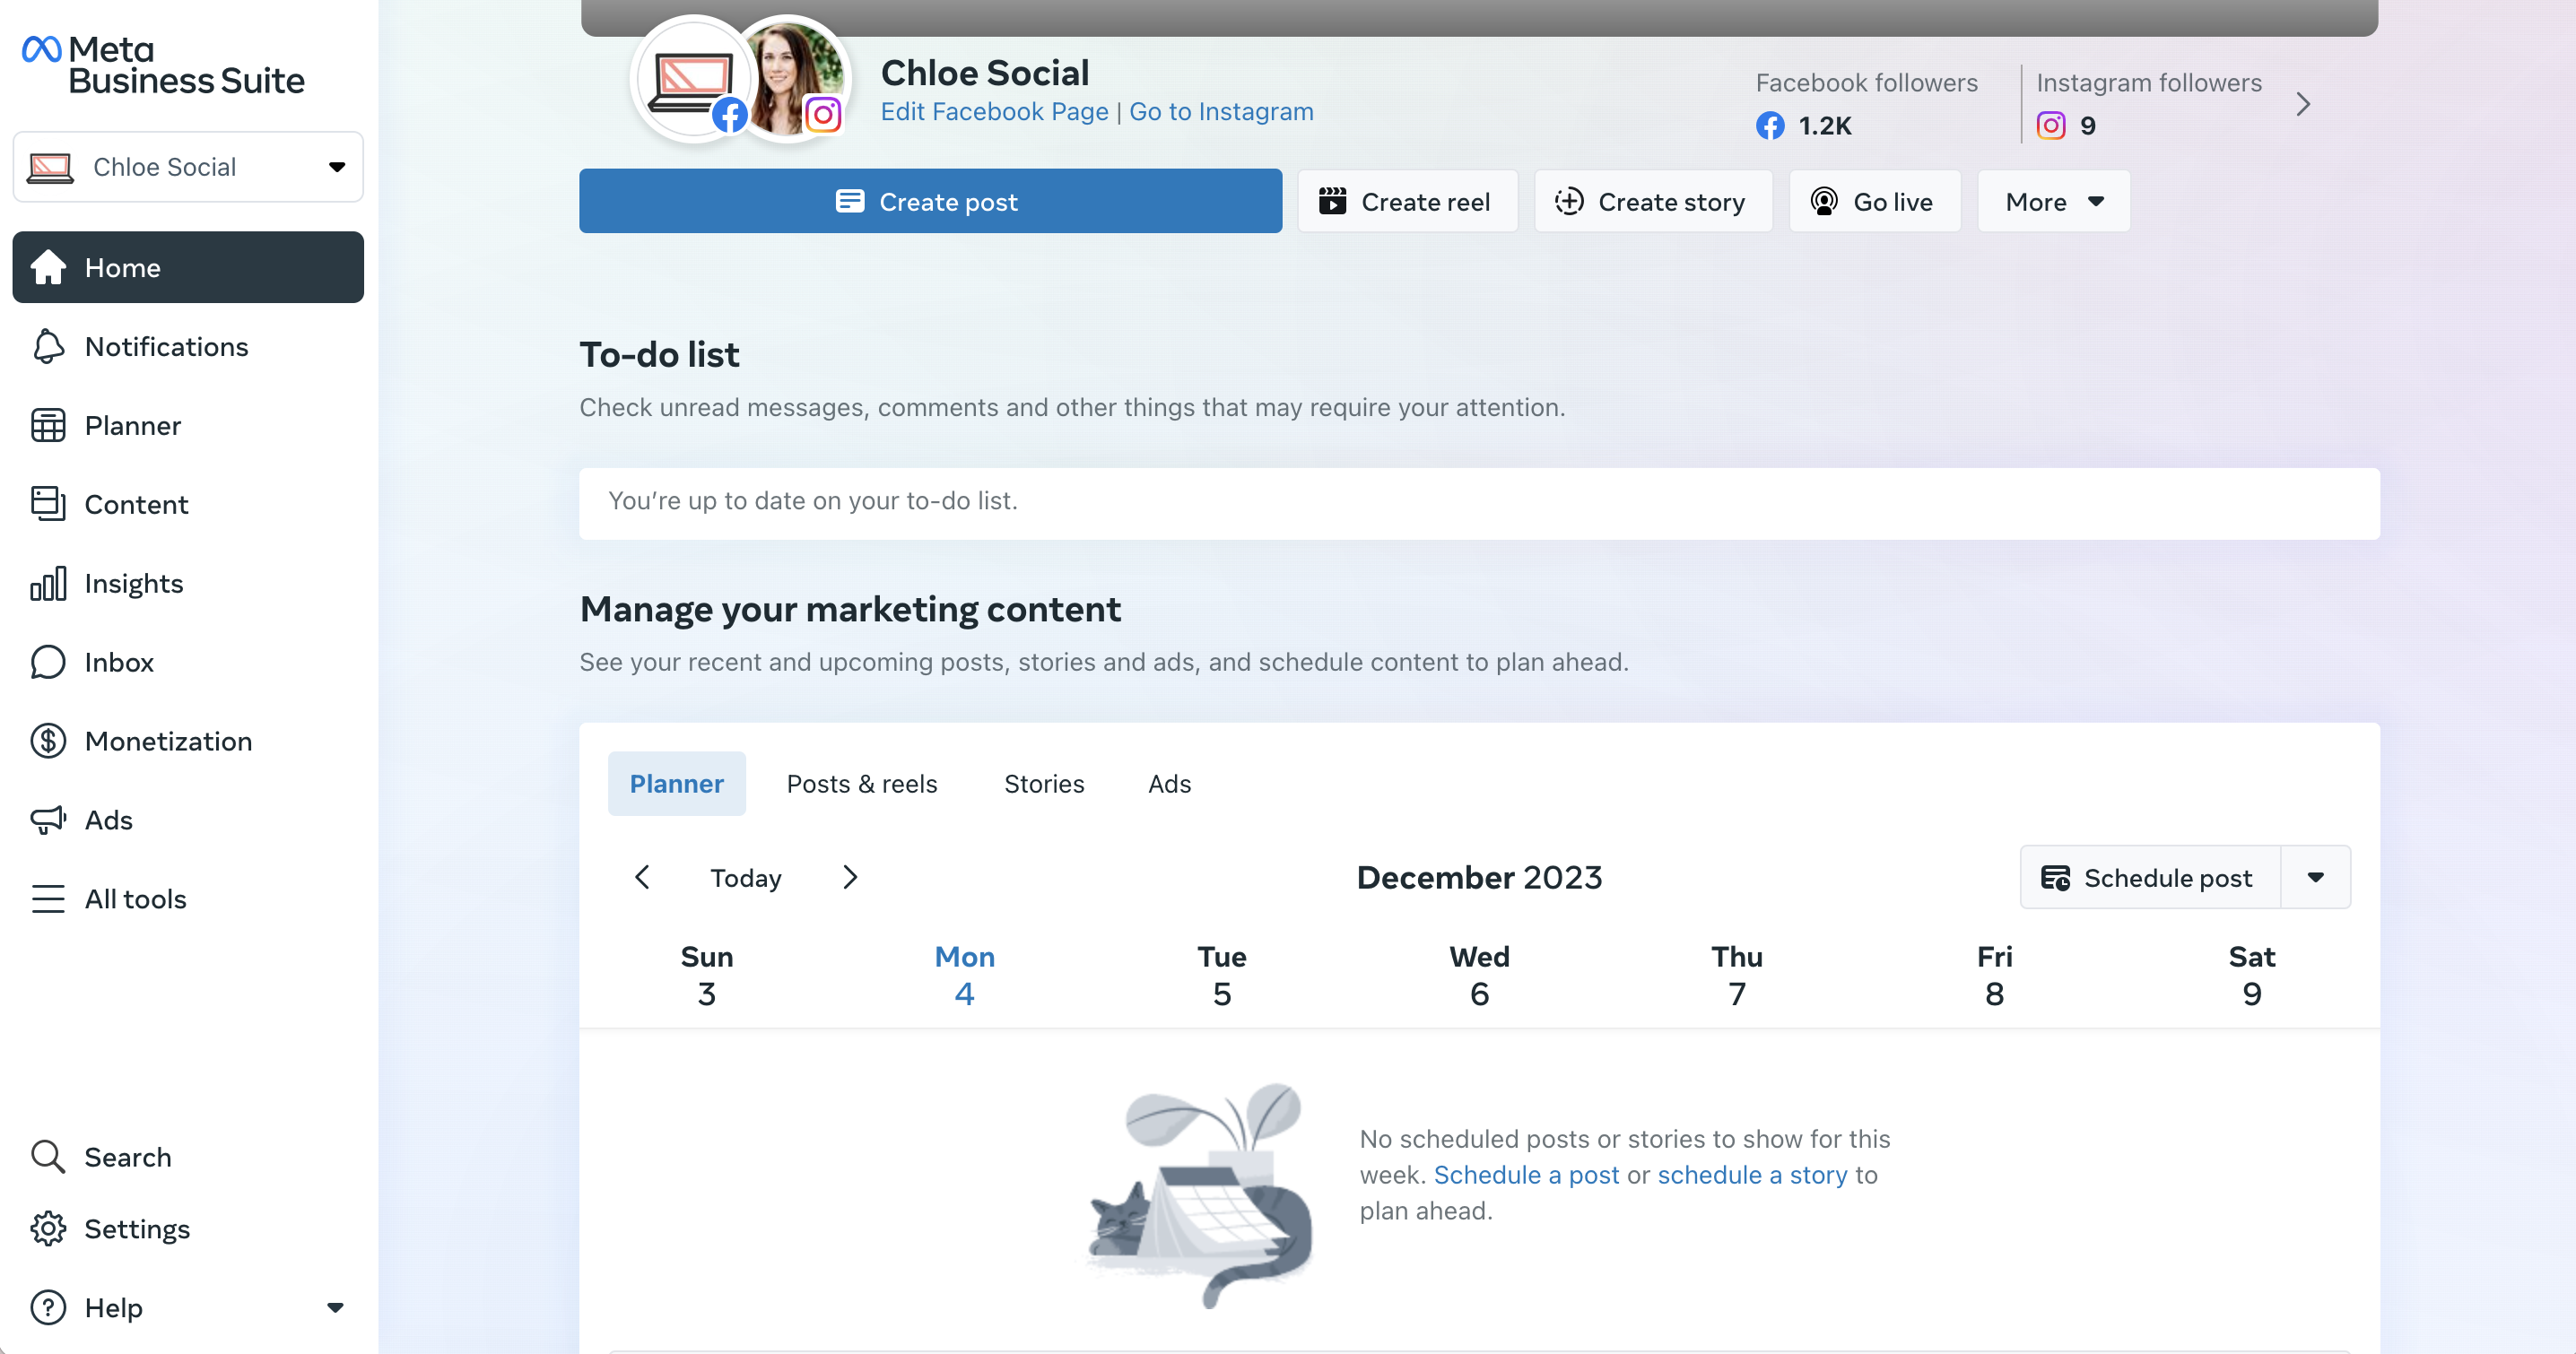 A screenshot of the content planner in Meta Business Suite